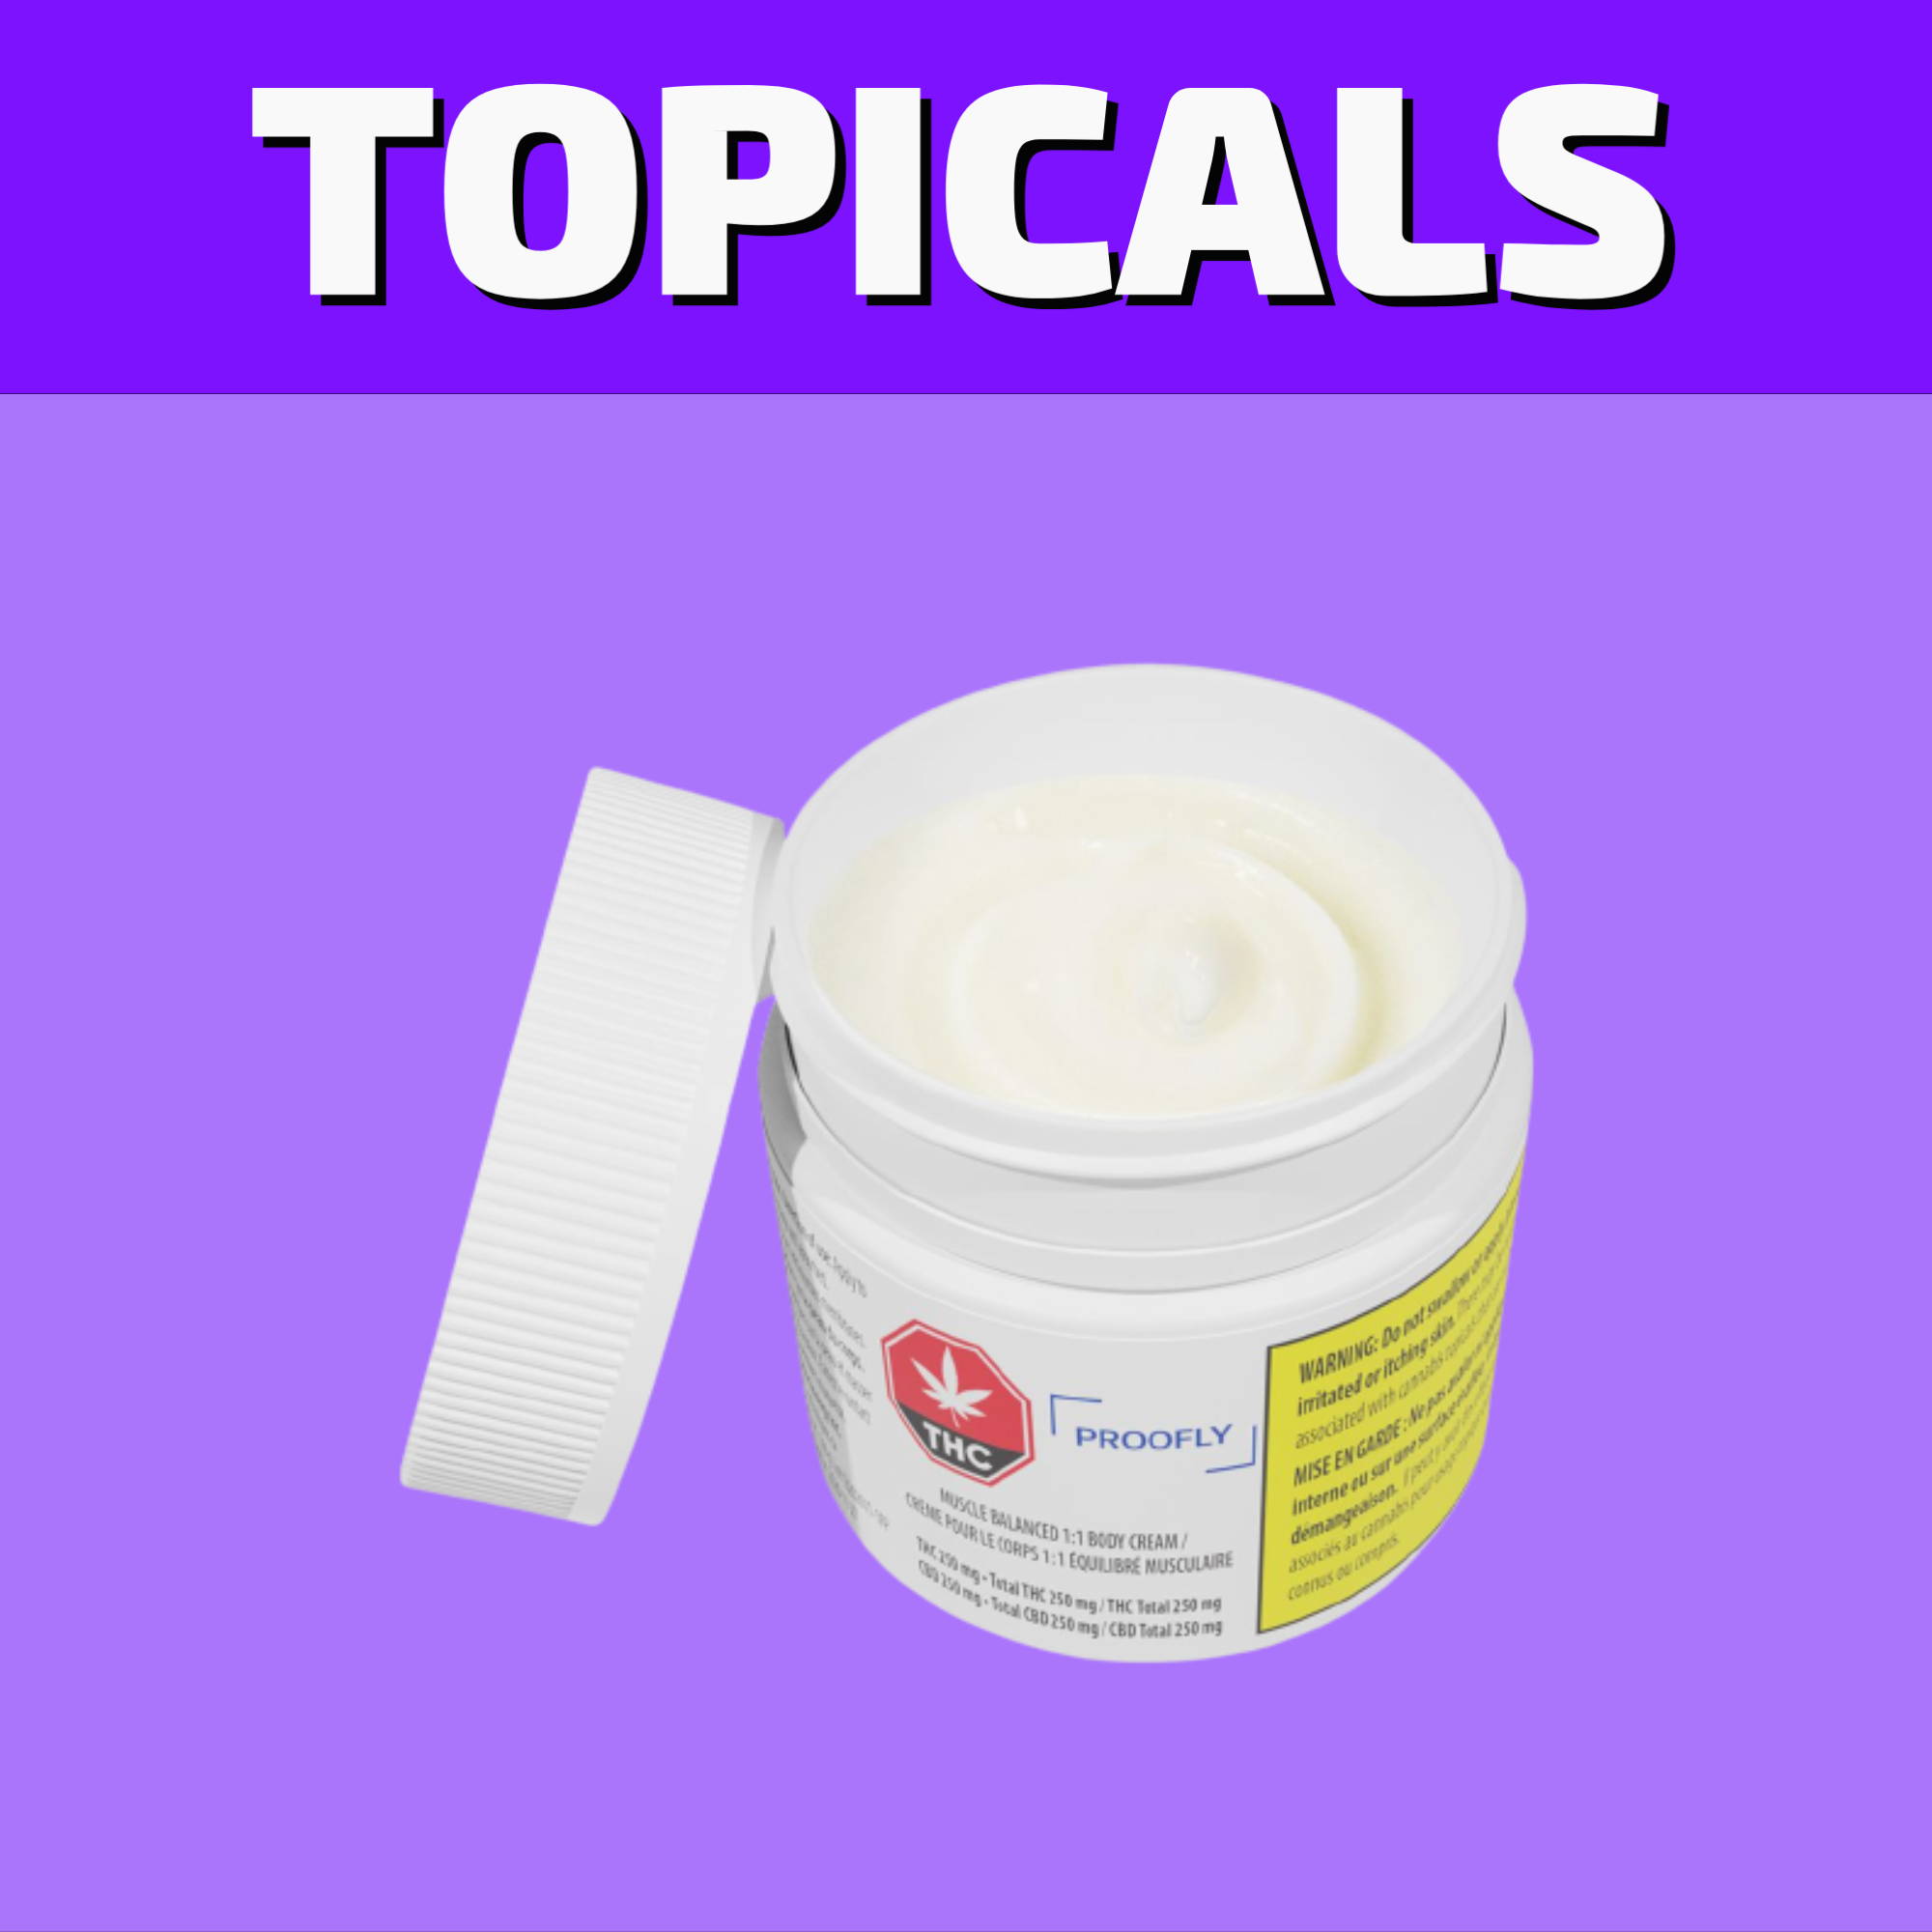 Shop Topicals, Lotions, Lip Balm, Bath Bombs, and CBD from Jupiter Cannabis Winnipeg to purchase in-store or order online for same day delivery.  